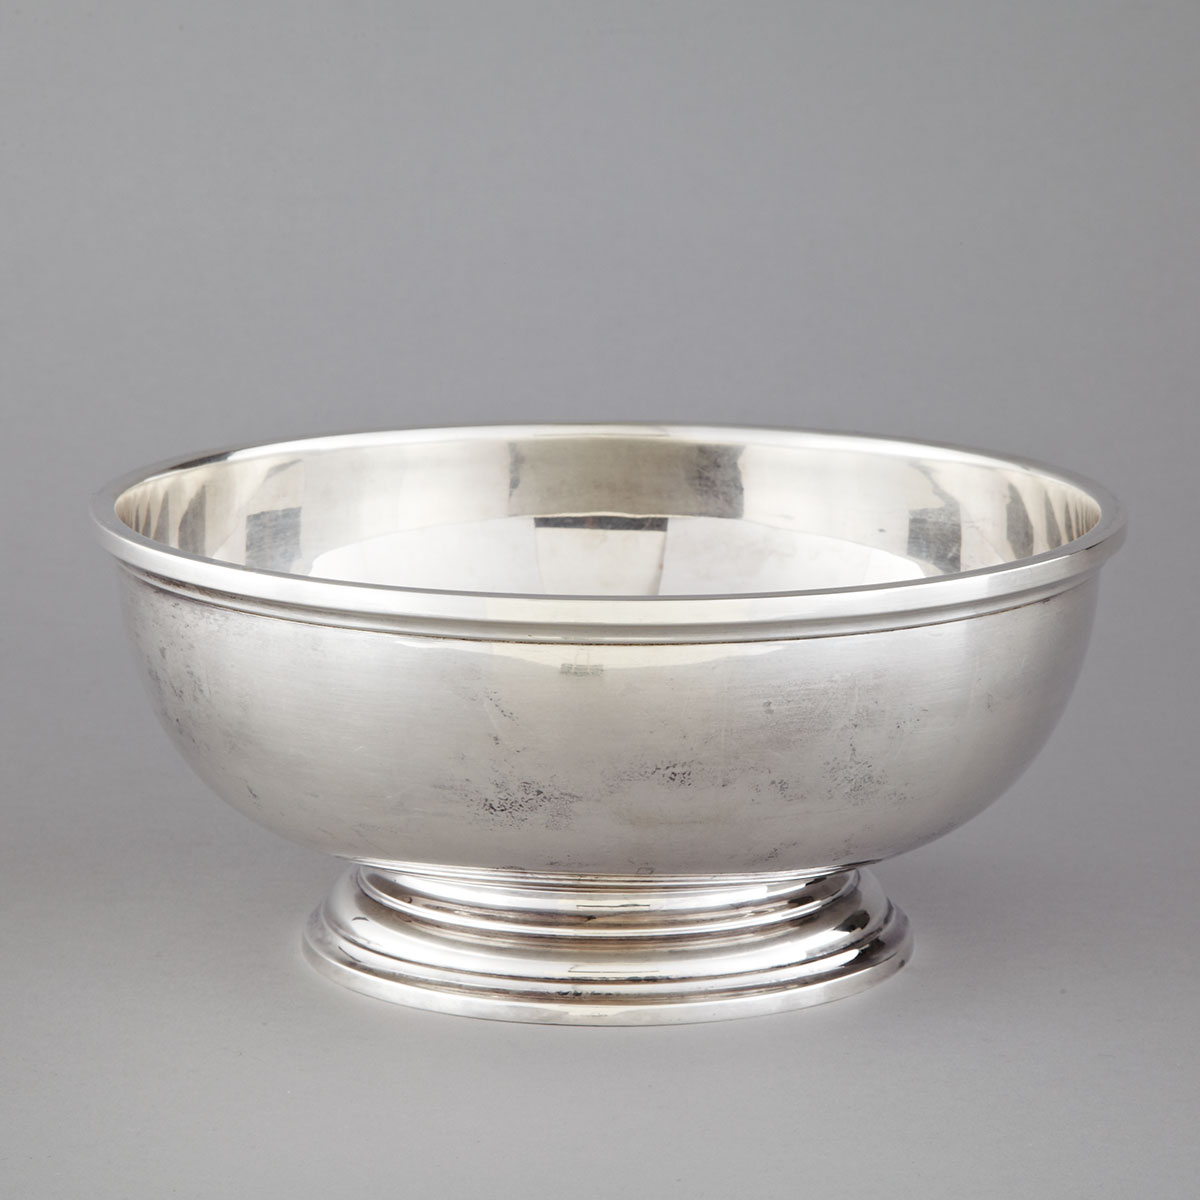 Canadian Silver Bowl, Henry Birks & Sons, Montreal, Que., c.1943